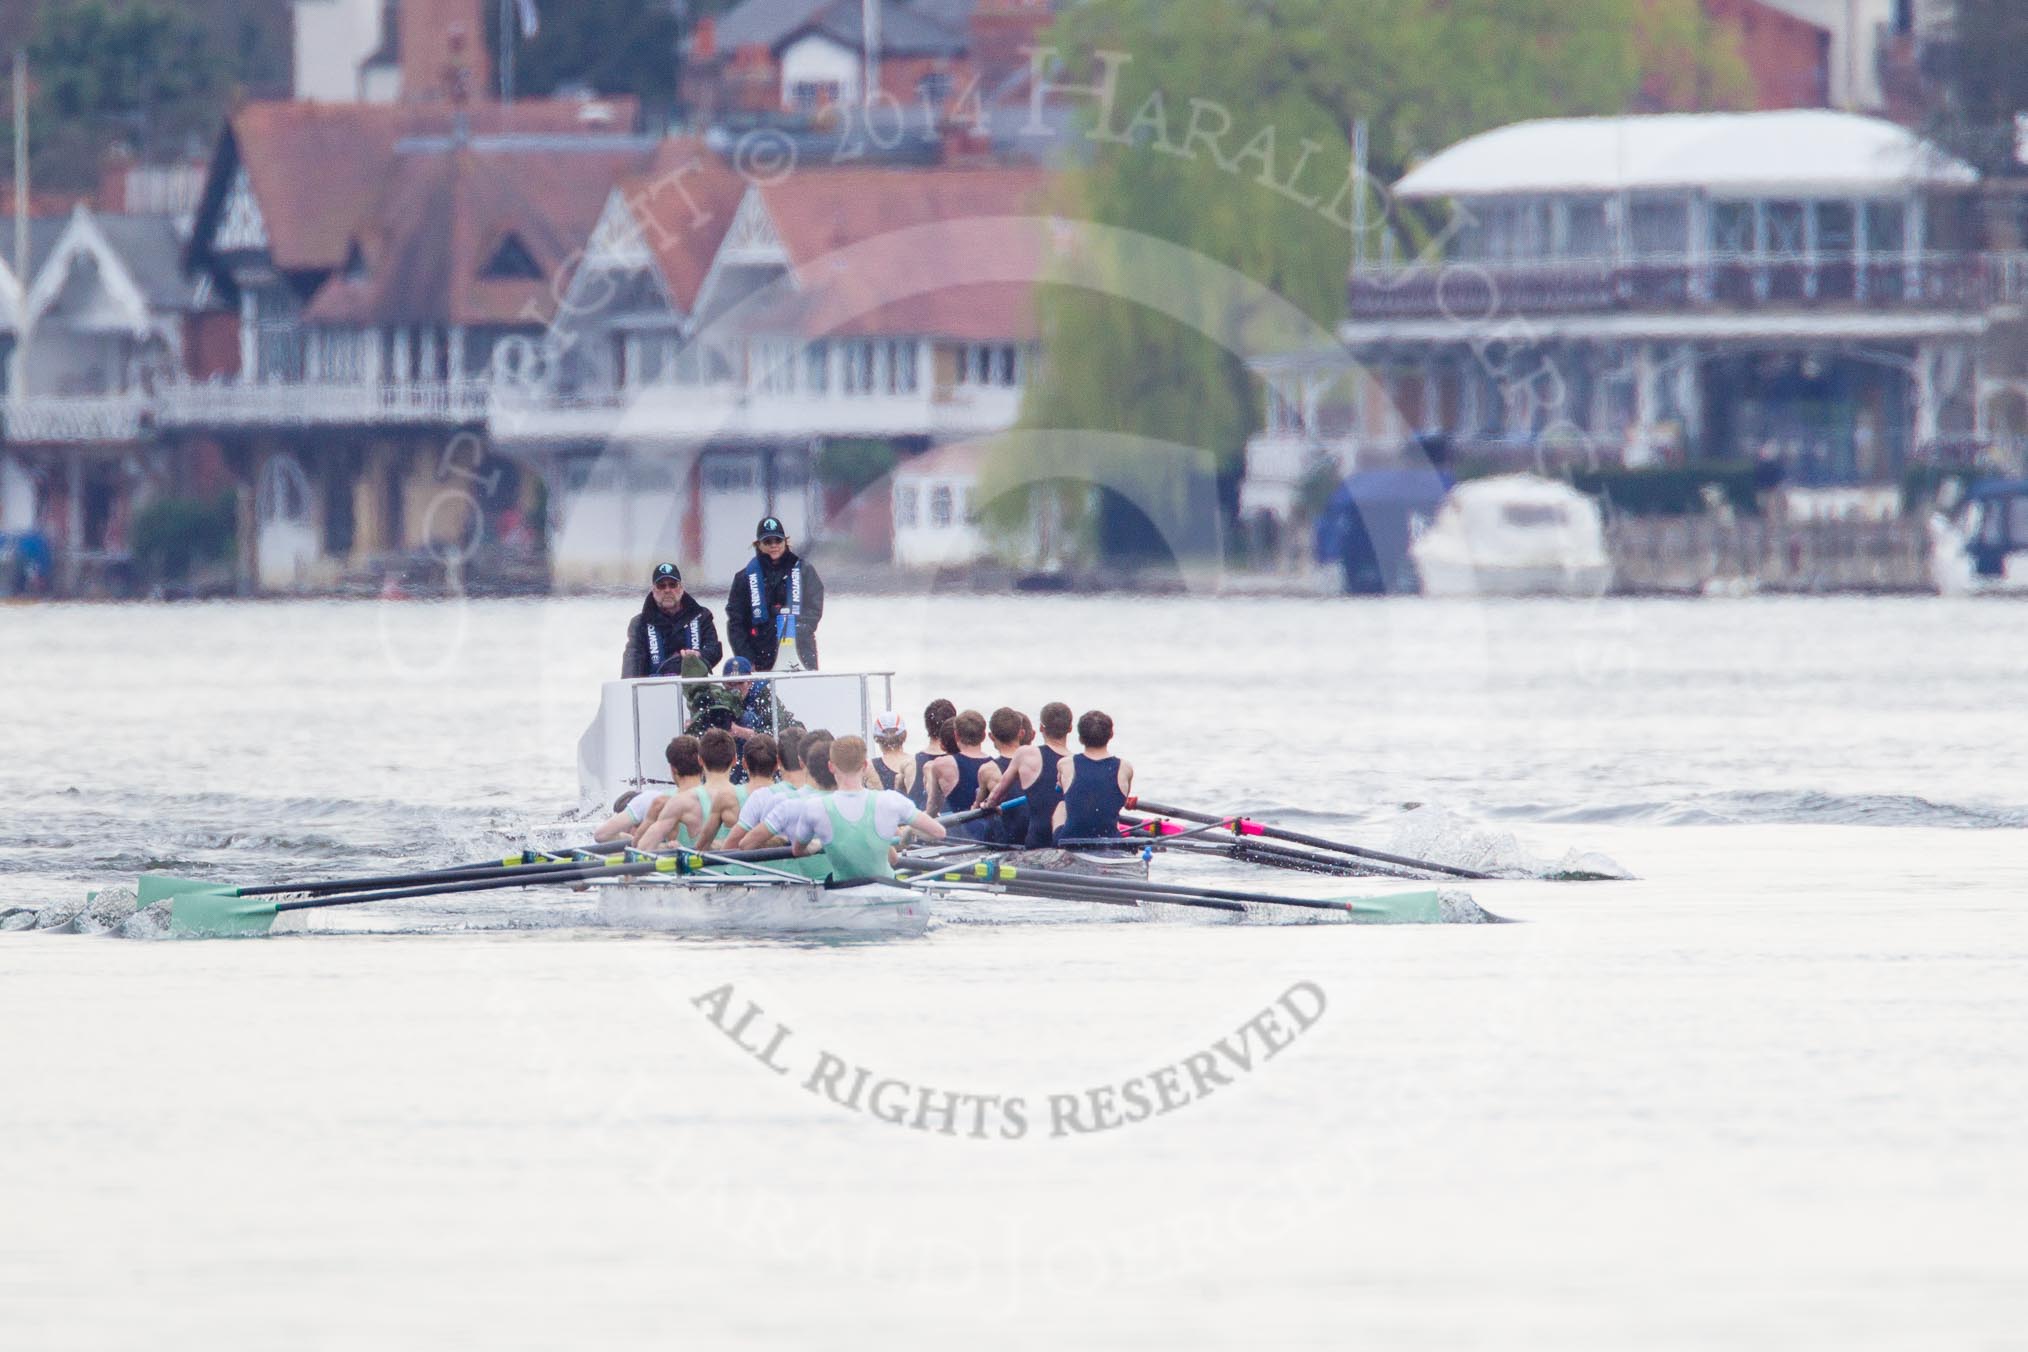 The Women's Boat Race and Henley Boat Races 2014: The Lightweight Men's Boat Race - OULRC vs CULRC, Oxford is on the right (Bucks) side, behind the boats is the umpire's launch..
River Thames,
Henley-on-Thames,
Buckinghamshire,
United Kingdom,
on 30 March 2014 at 15:39, image #358